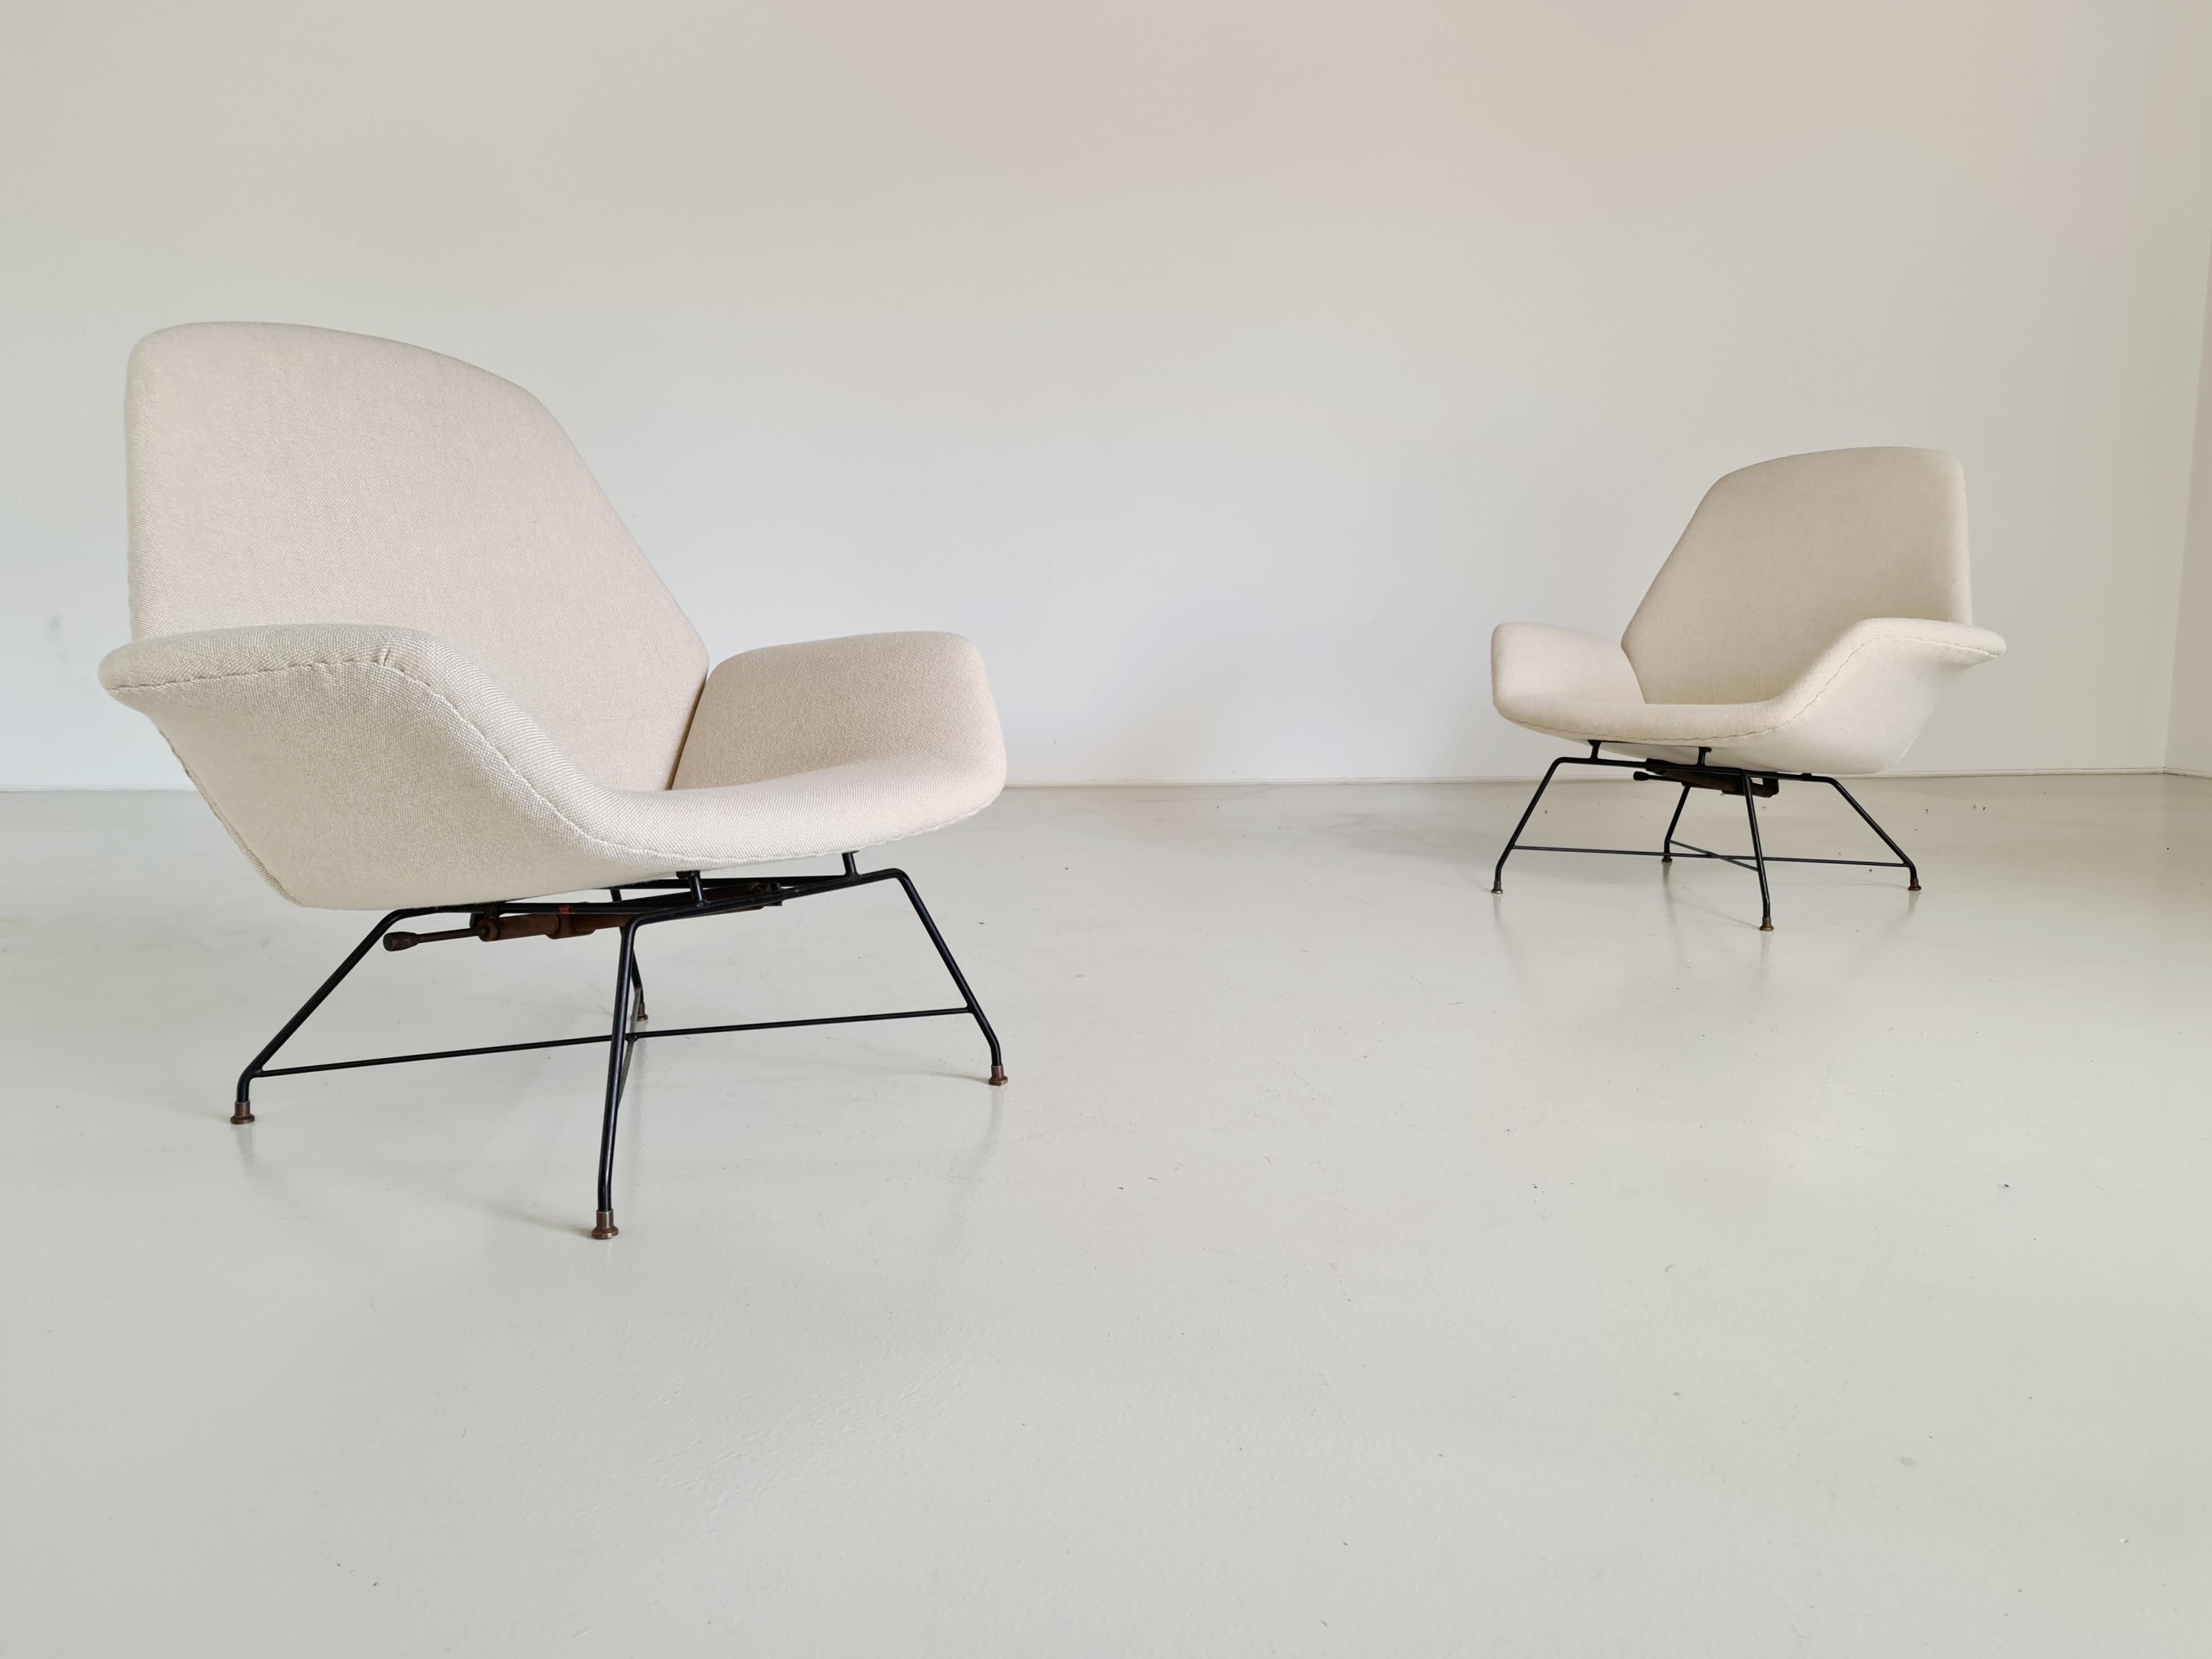 Recliner lounge chairs mod. ‘Lotus’ by Augusto Bozzi for Saporiti, Italy 1960s. 

Lotus-shaped seating and backrest on a distinctive streamlined black coated wire frame and chic patinated brass details. Reupholstered in a Kvadrat Tonus fabric and